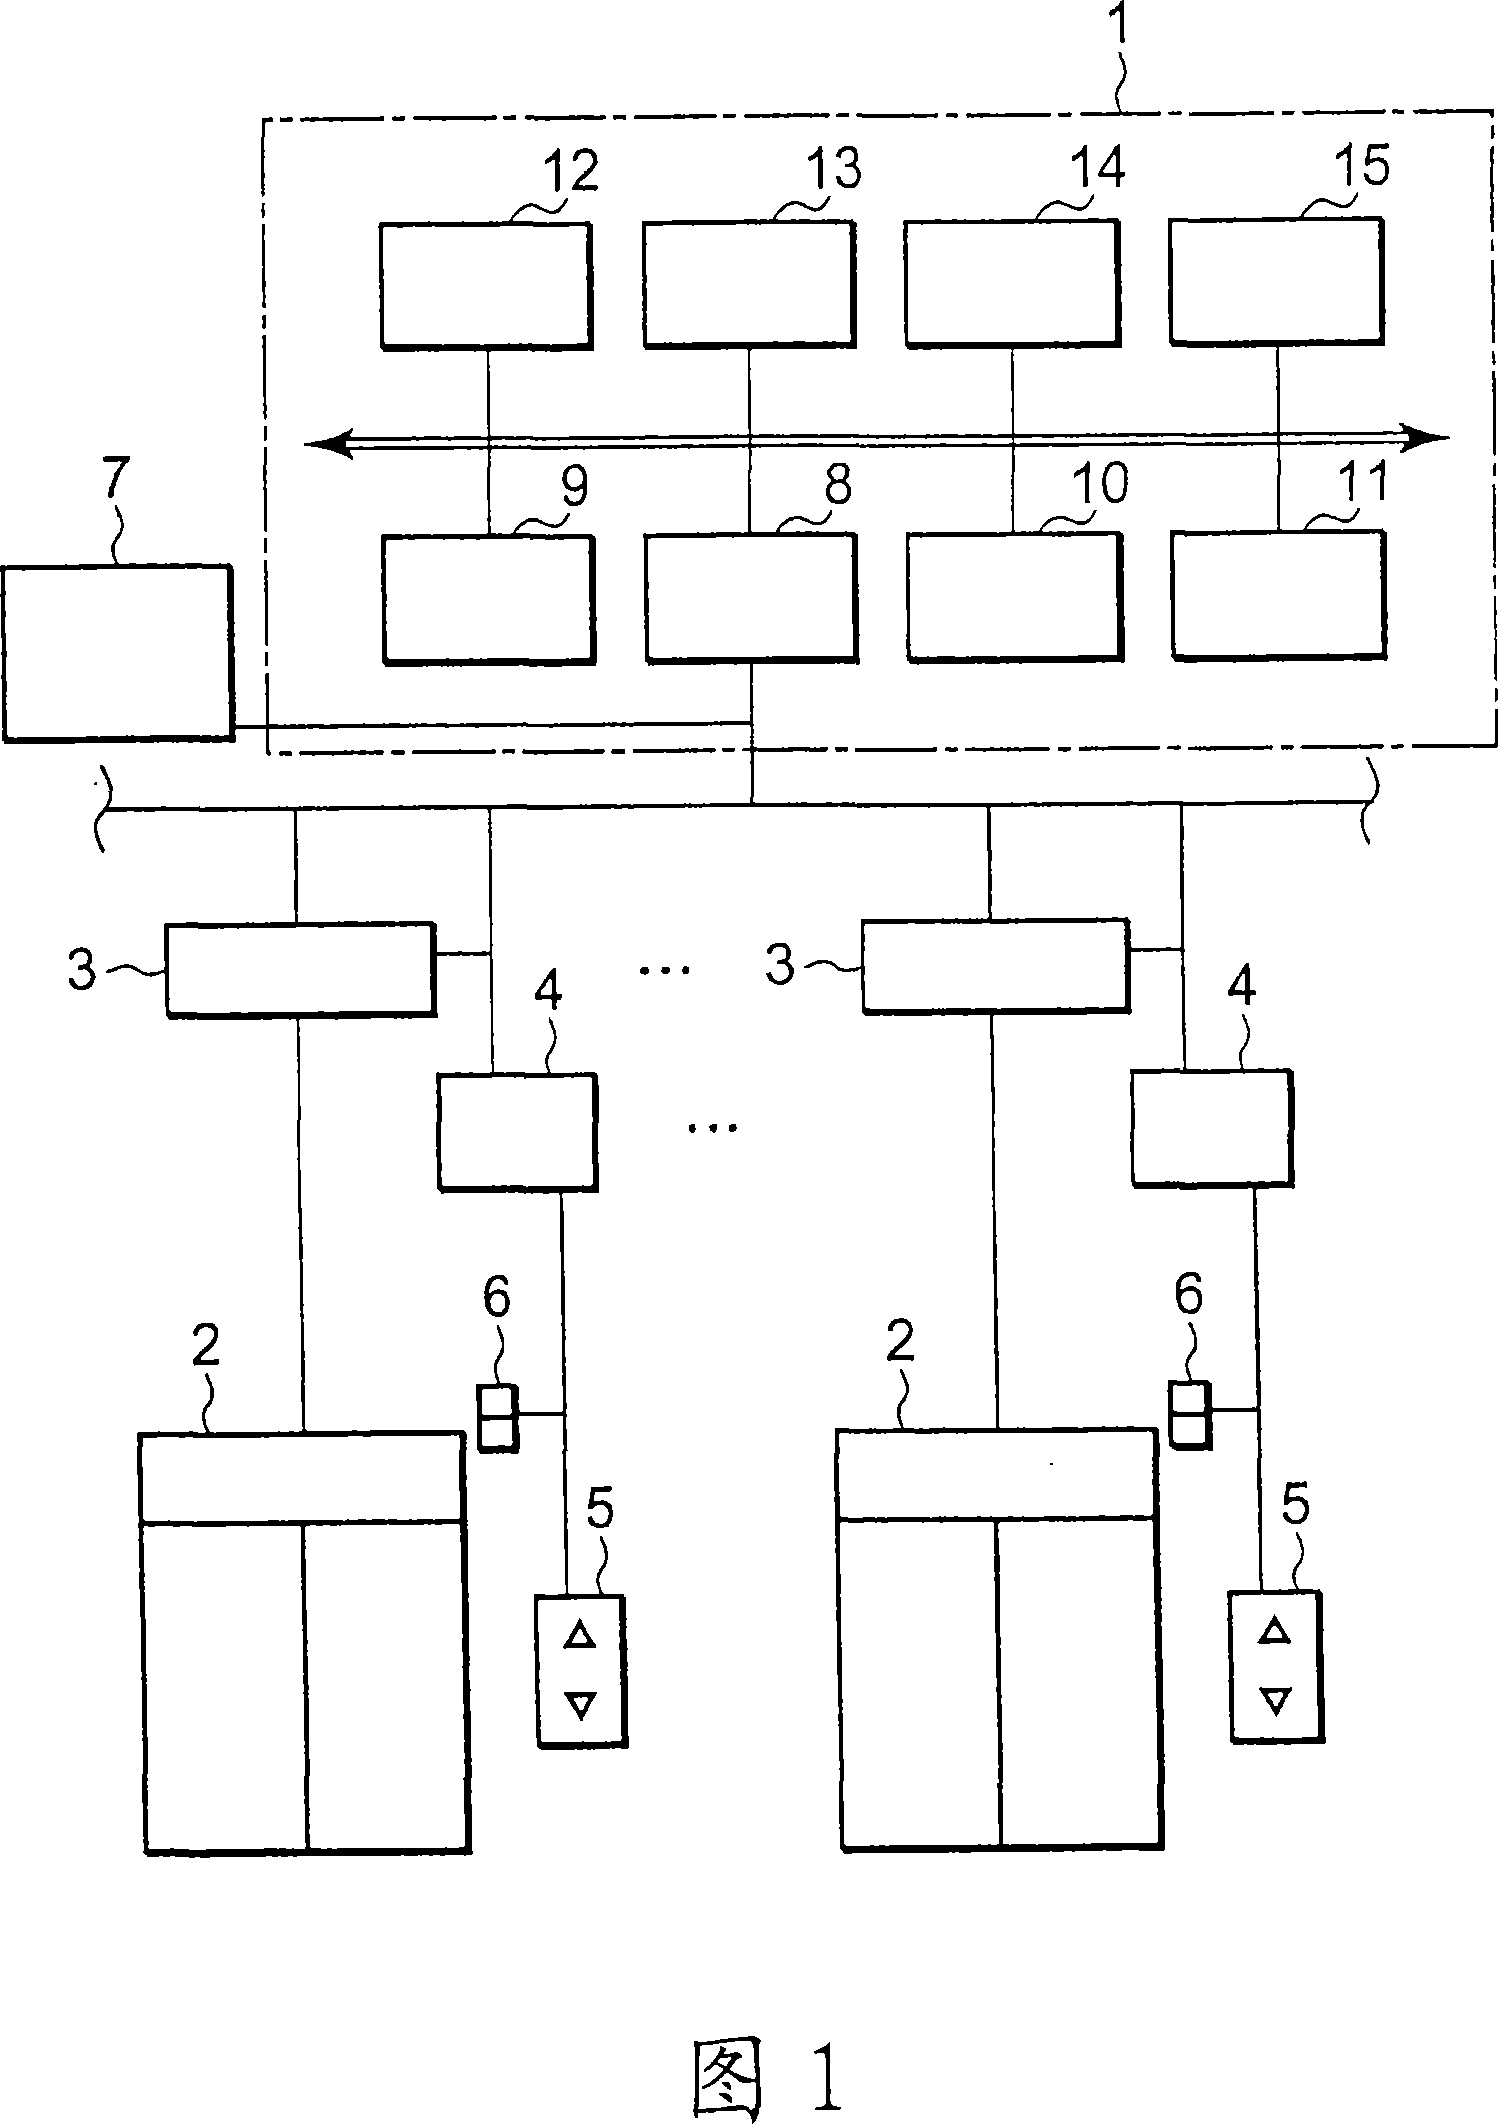 Elevator group management and control device